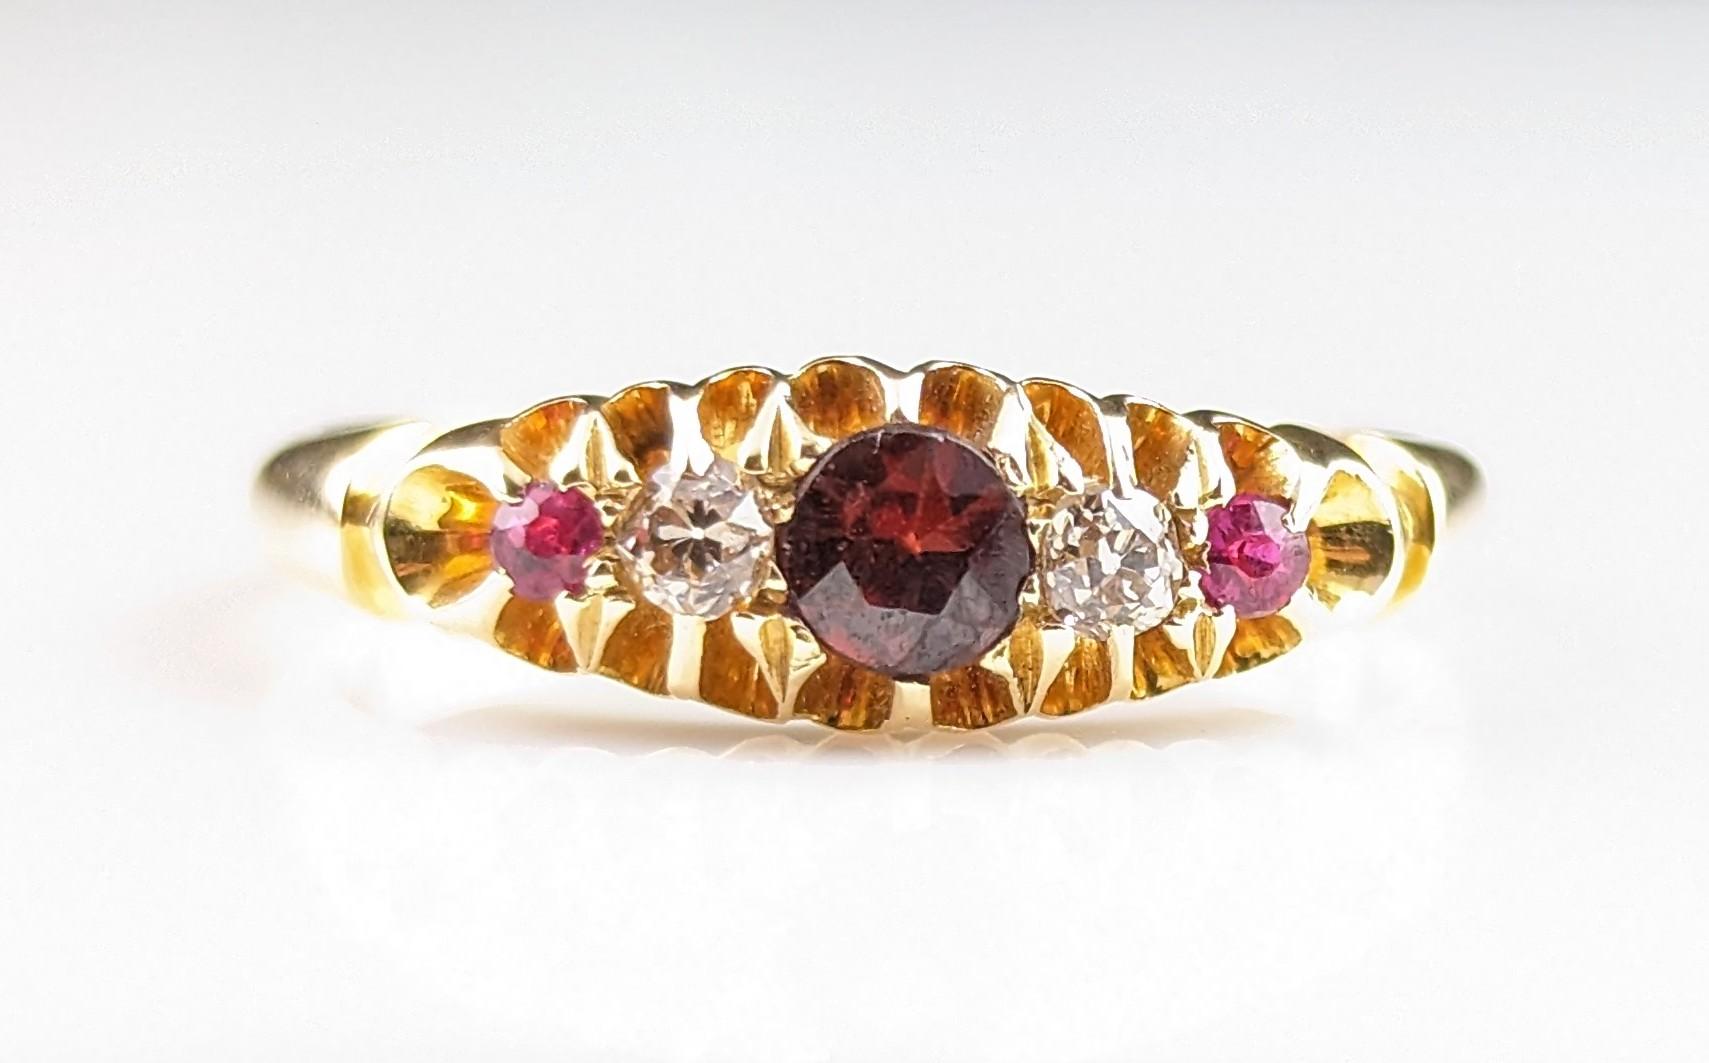 Antique Garnet, Ruby and Diamond Ring, 18ct Gold 14